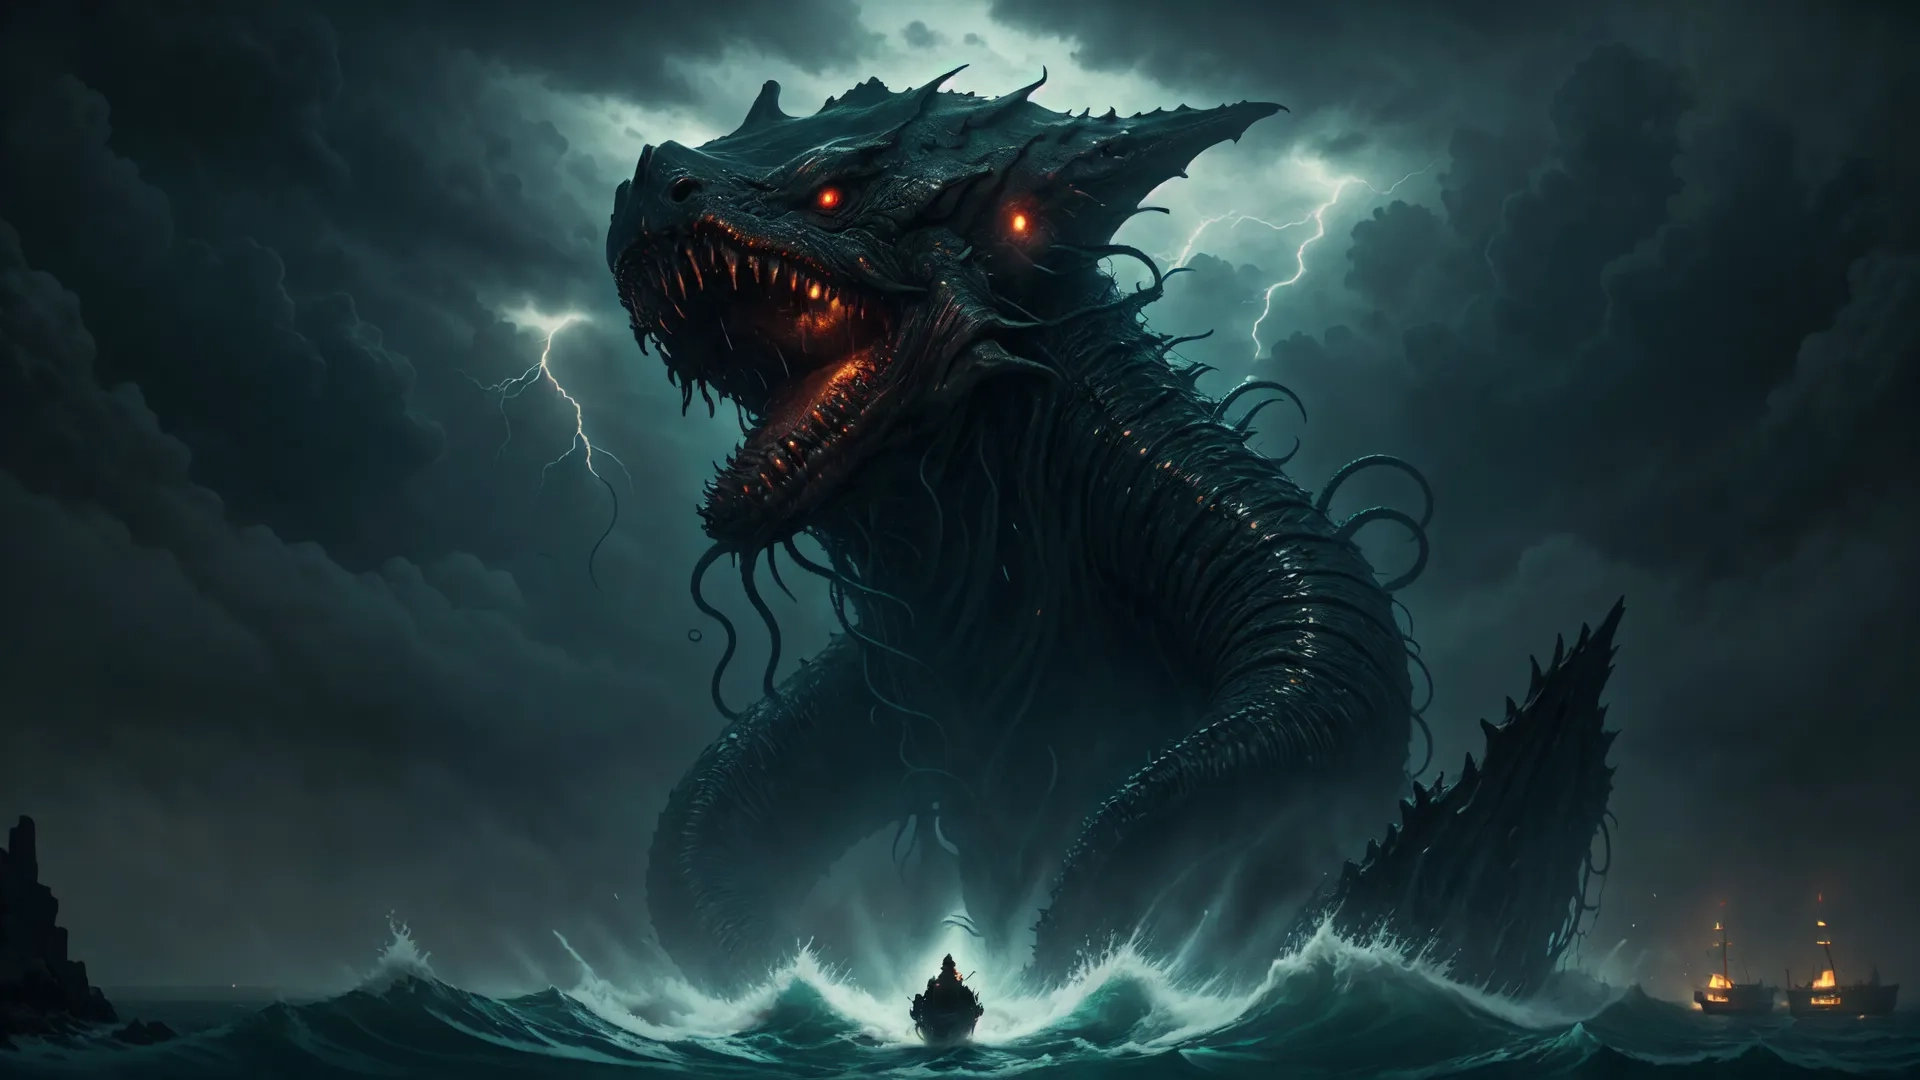 a monster like creature that is flying in the clouds next to a ship on a stormy night with stormy skies behind it, there is a man on the ship in the foreground
